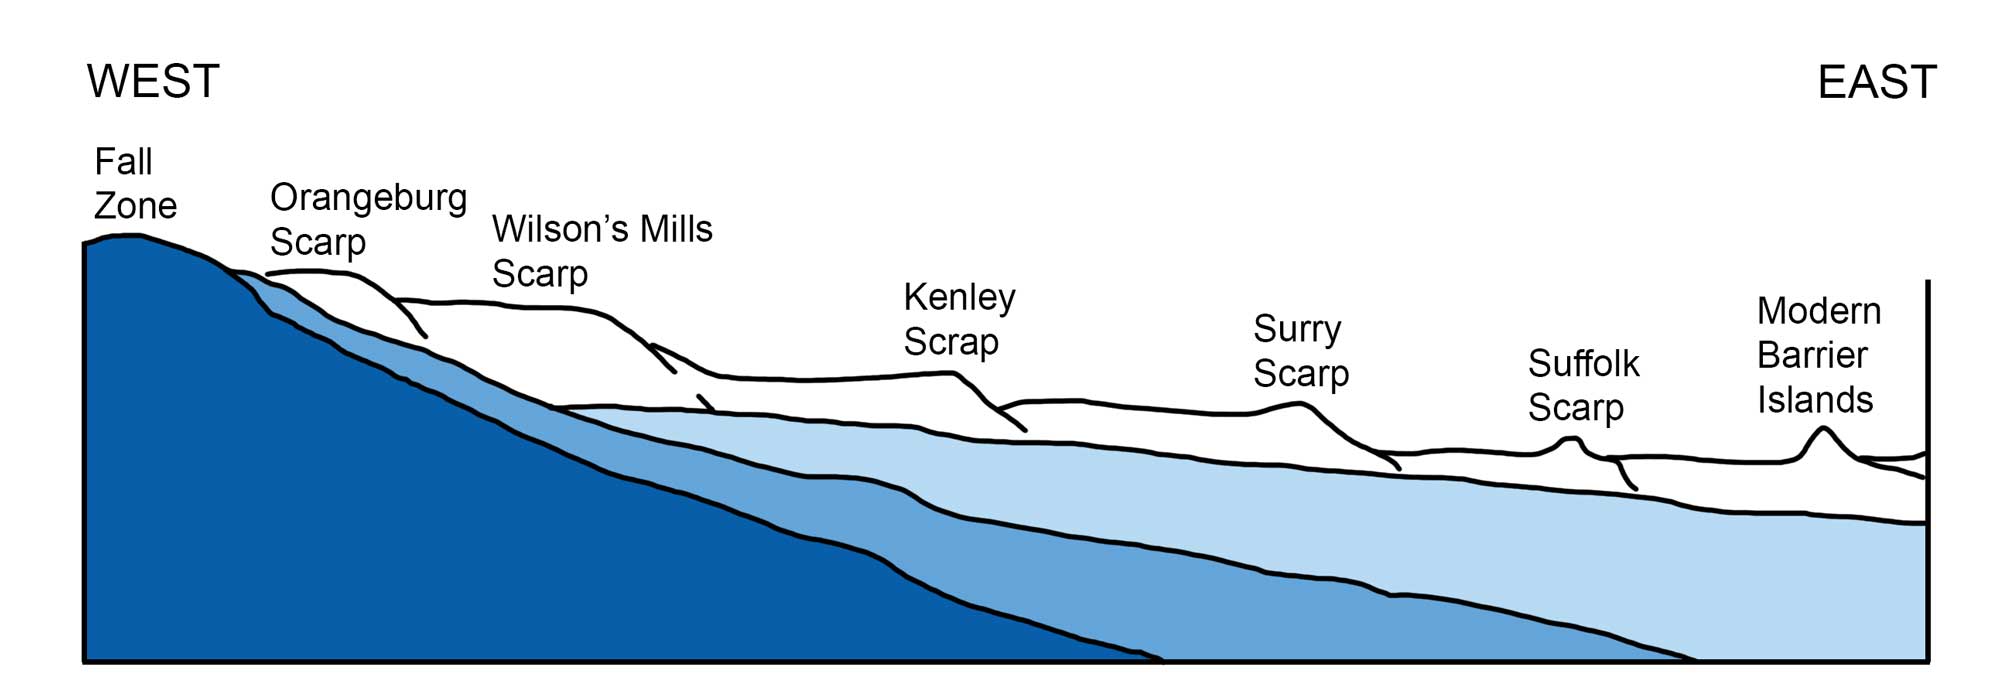 Cross-section diagram showing the development of scarps and terraces of North Carolina's Coastal Plain.